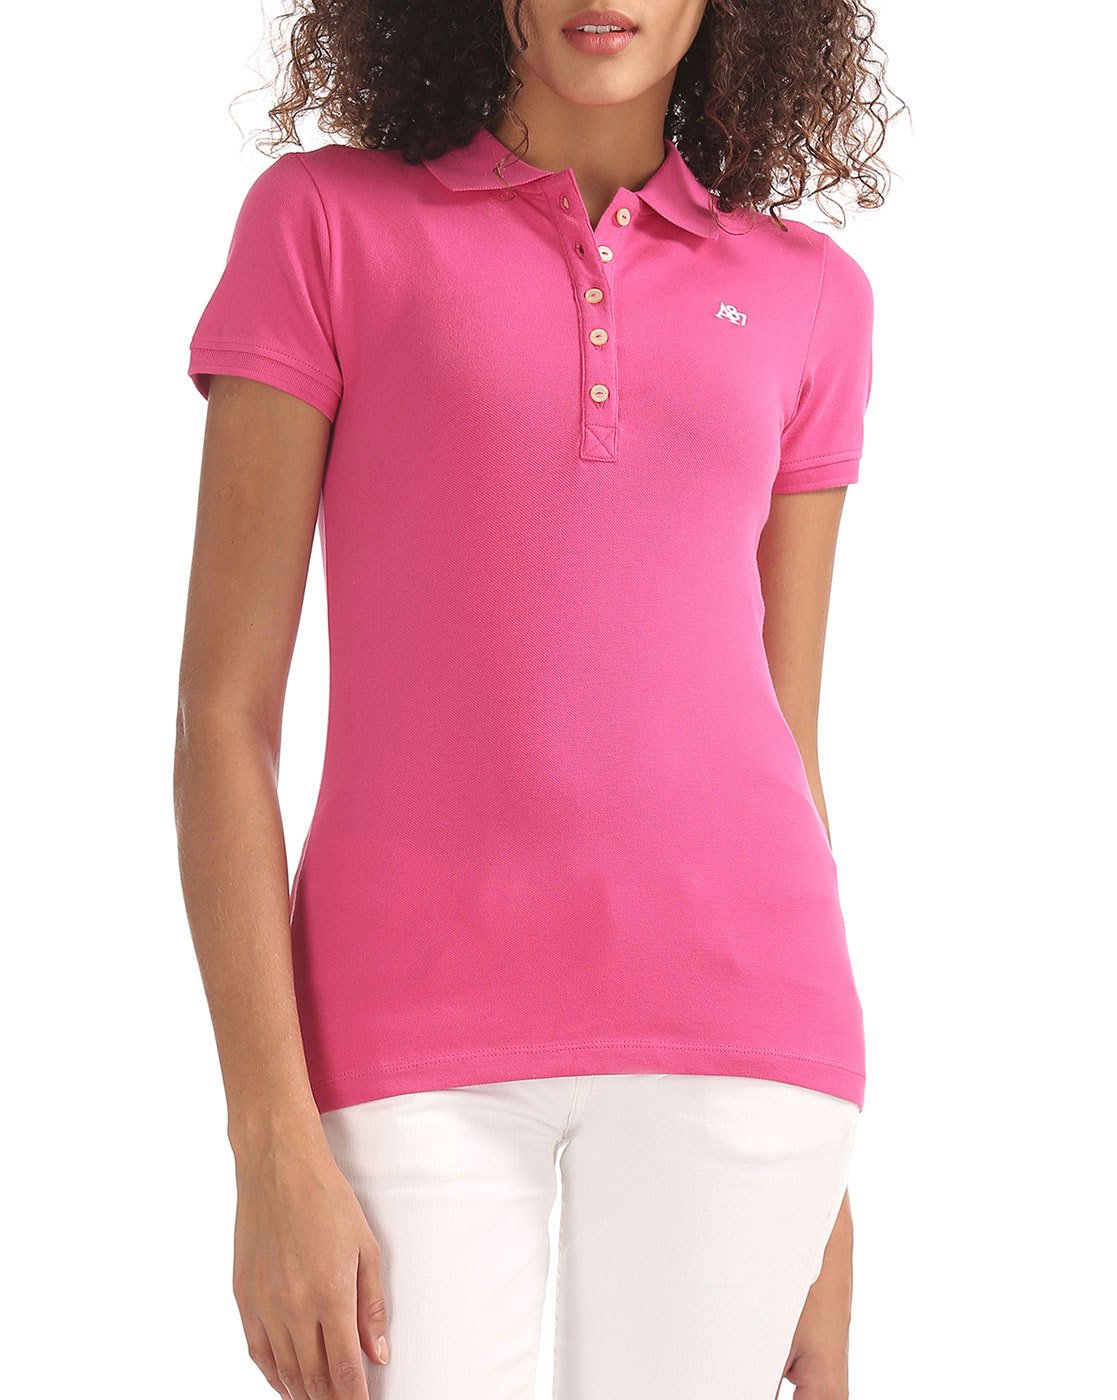 Joules Womens/Ladies Trinity Short Sleeve Slim Fit Cotton Polo Shirt Joules Clothing